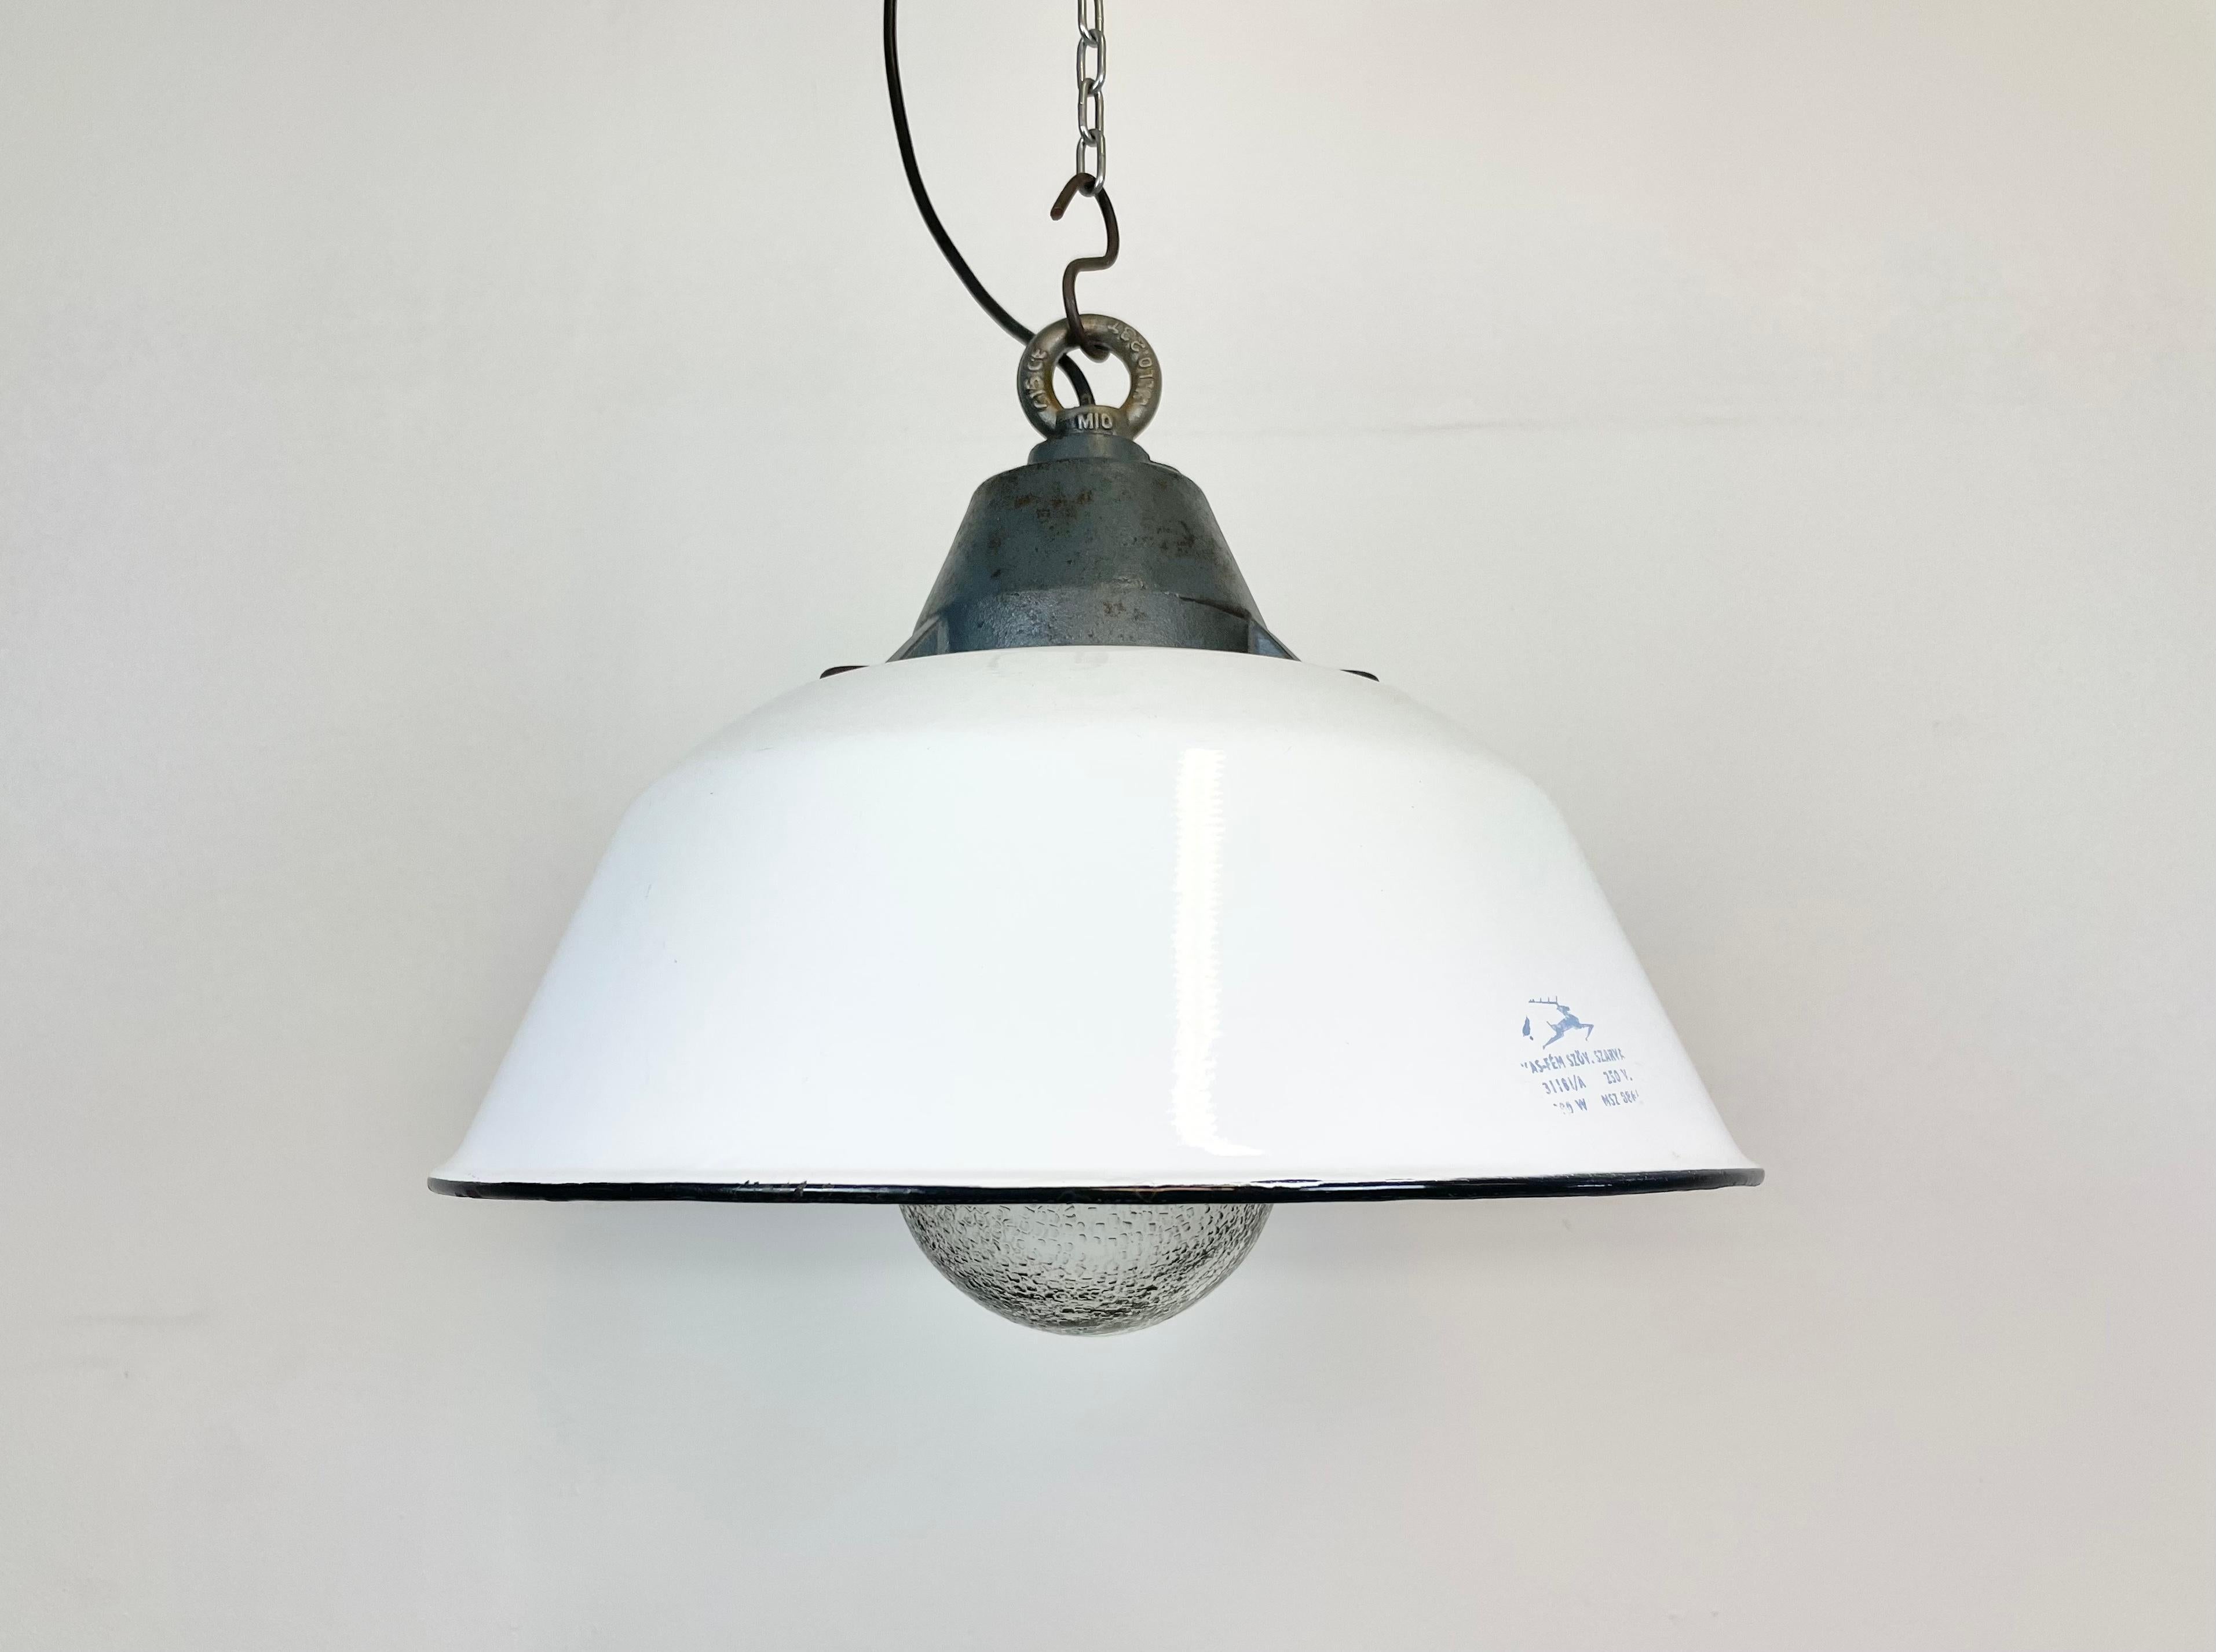 Industrial hanging lamp manufactured by Szarvasi Vas - Fém in Hungary during the 1960s. It features a white enamel shade, white enamel interior, a grey cast iron top and frosted glass cover New porcelain socket requires E 27 light bulbs. New wire.